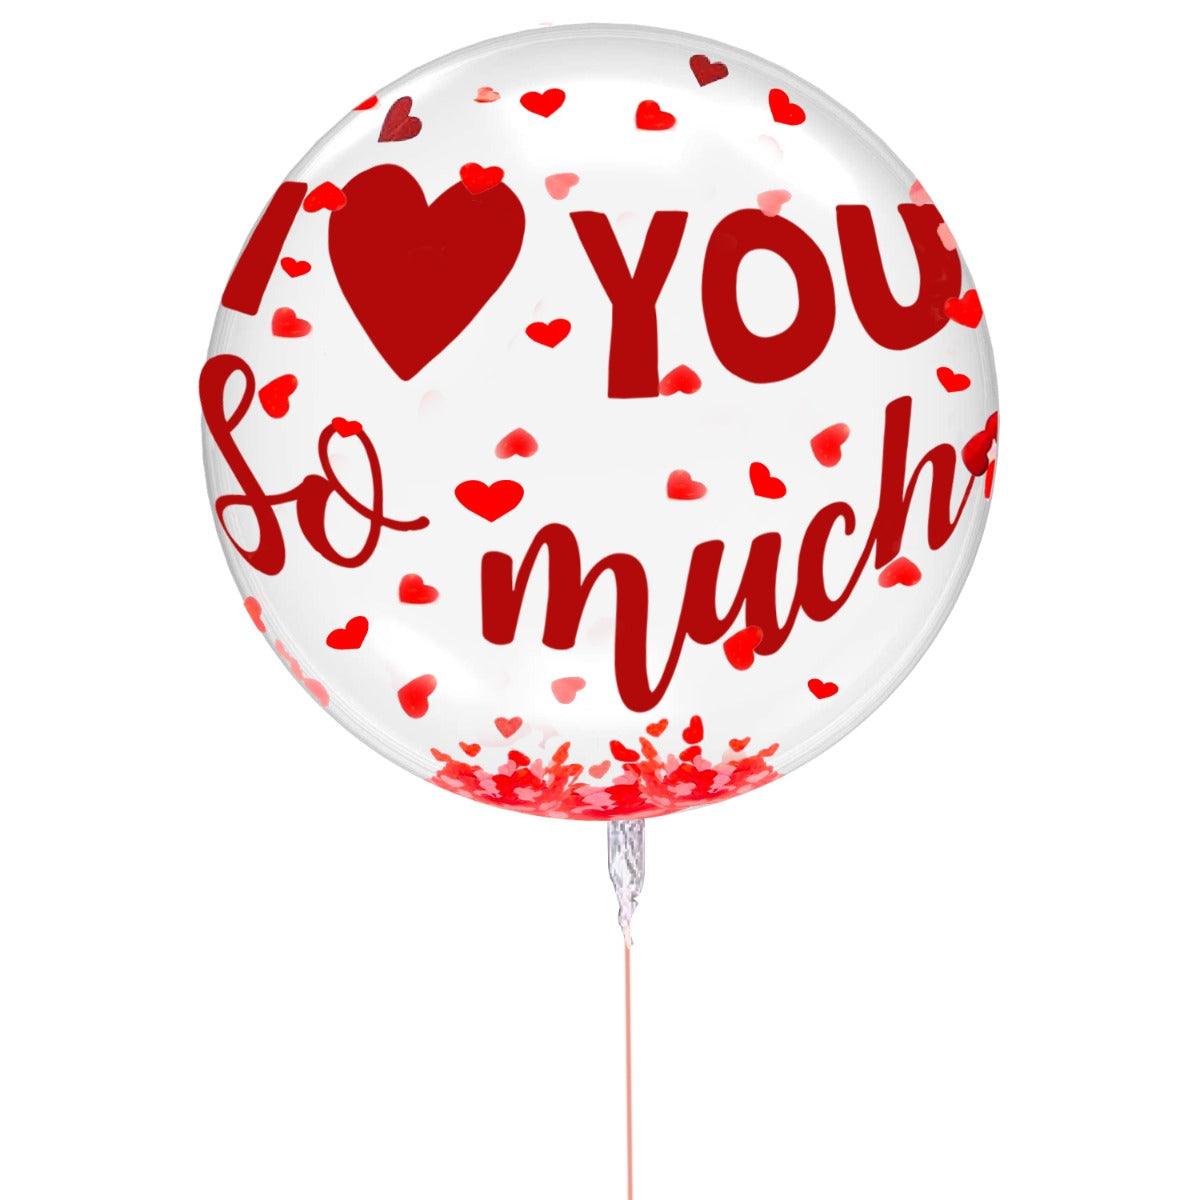 PartyCorp Round Tranparent Confetti BOBO Balloon With I Love You Sticker For Party Decoration, 1 pc